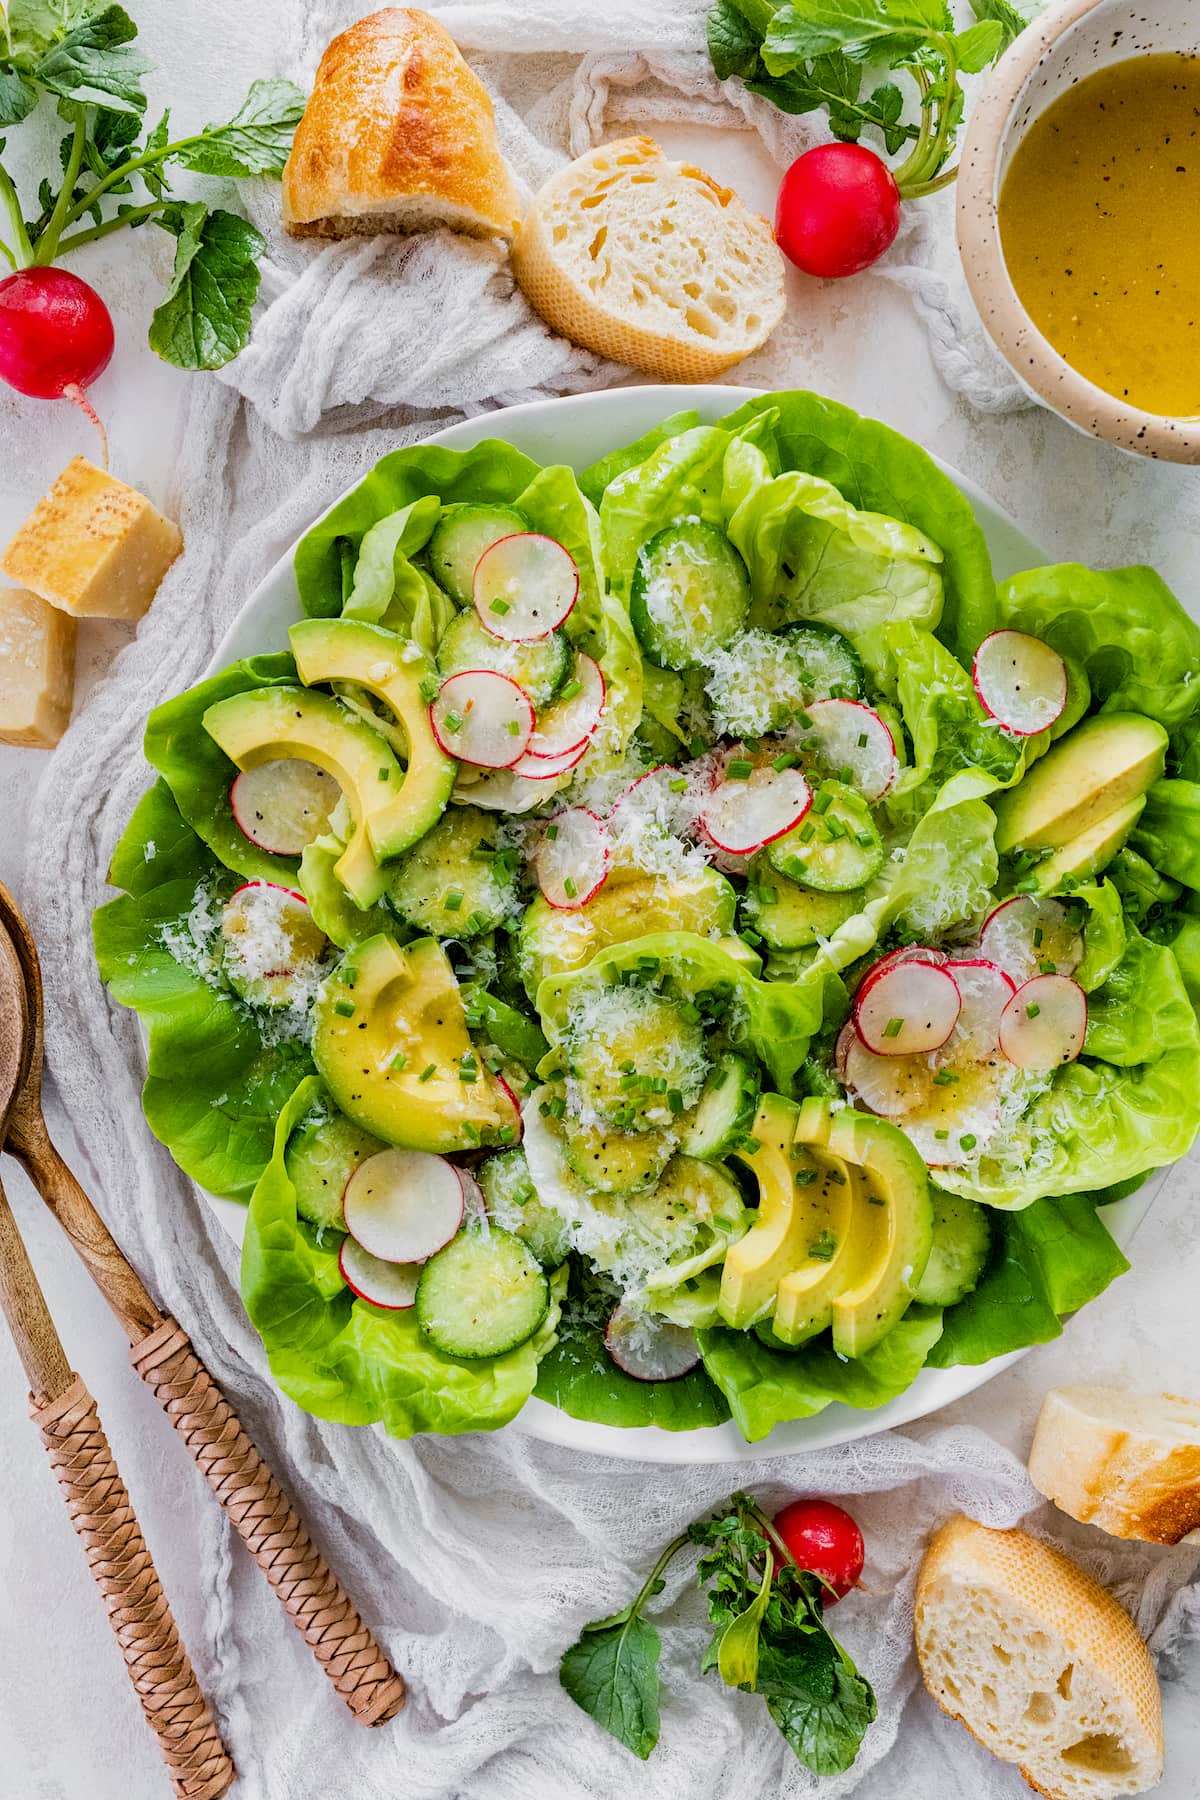 butter lettuce salad with avocado, cucumber, radish slices, chives, Parmesan cheese, and lemon dressing In large white bowl with baguette on the side. 